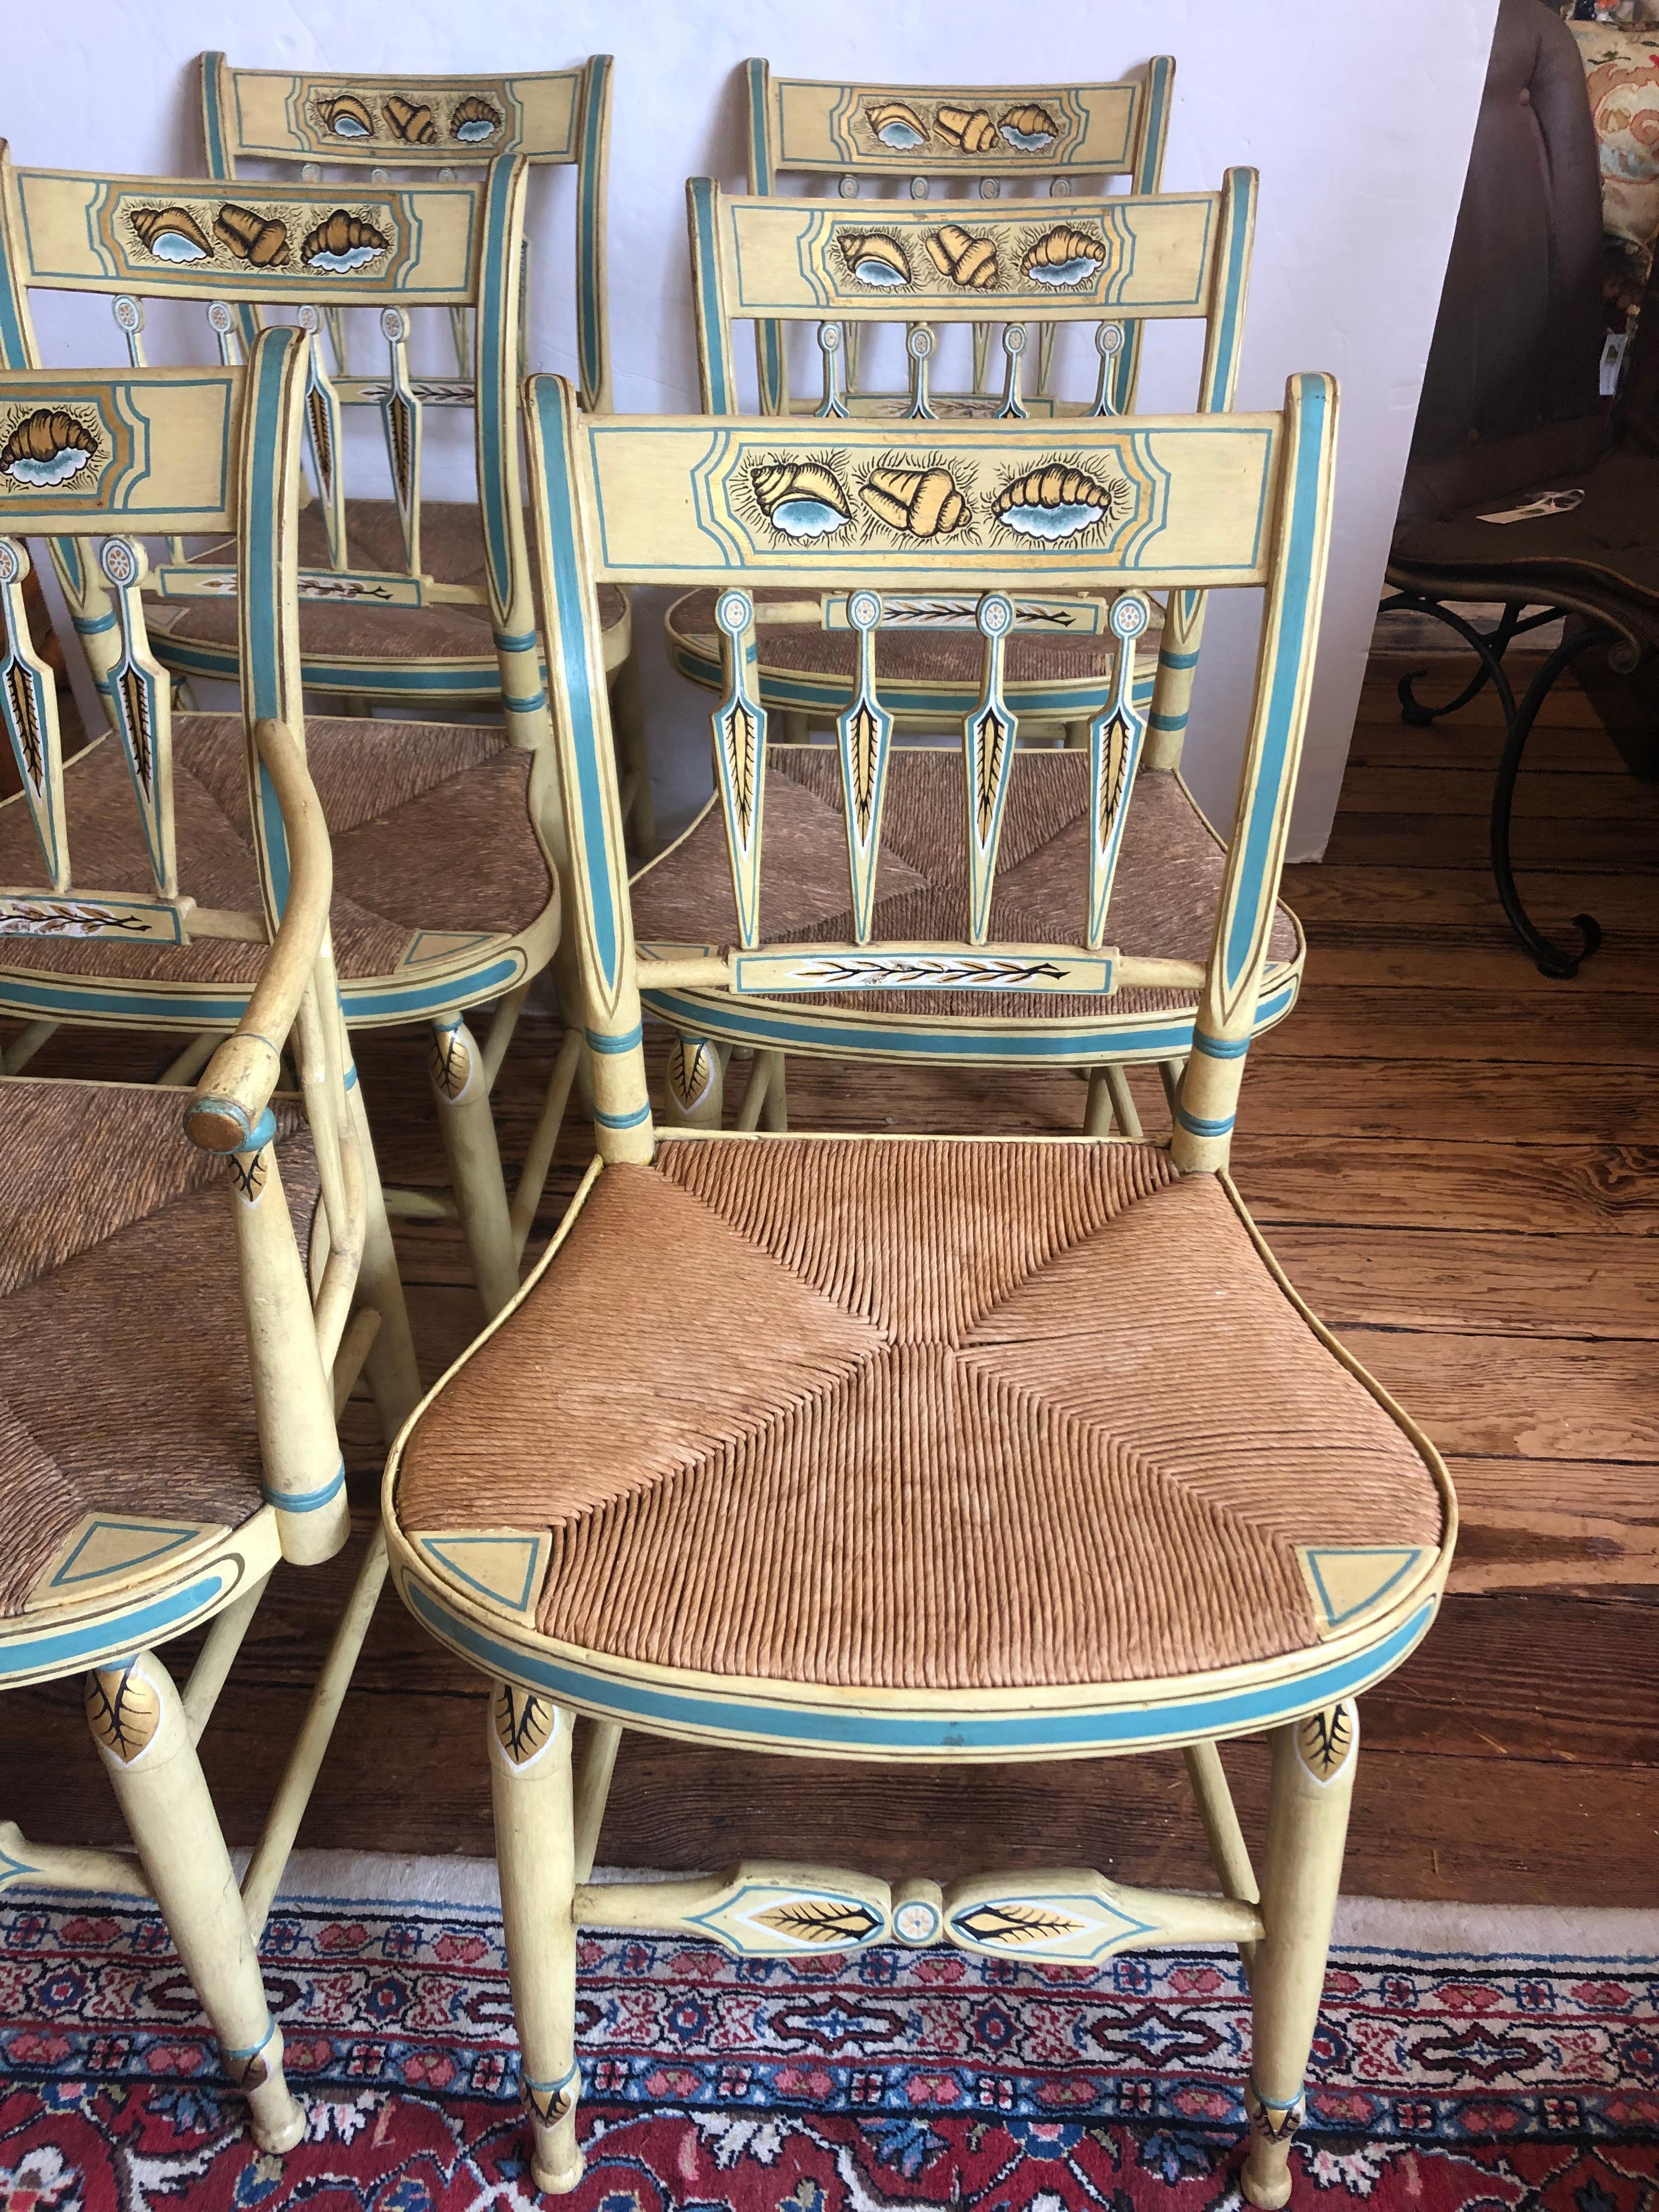 Charming timeless casual country set of Hitchcock antique dining chairs, handpainted in light yellow and teal with darling shell decoration and rush seats. One armchair, 5 sides.
Measures: seat height 18
Arm chair 20.5 W 17 D 33.25 H arm height